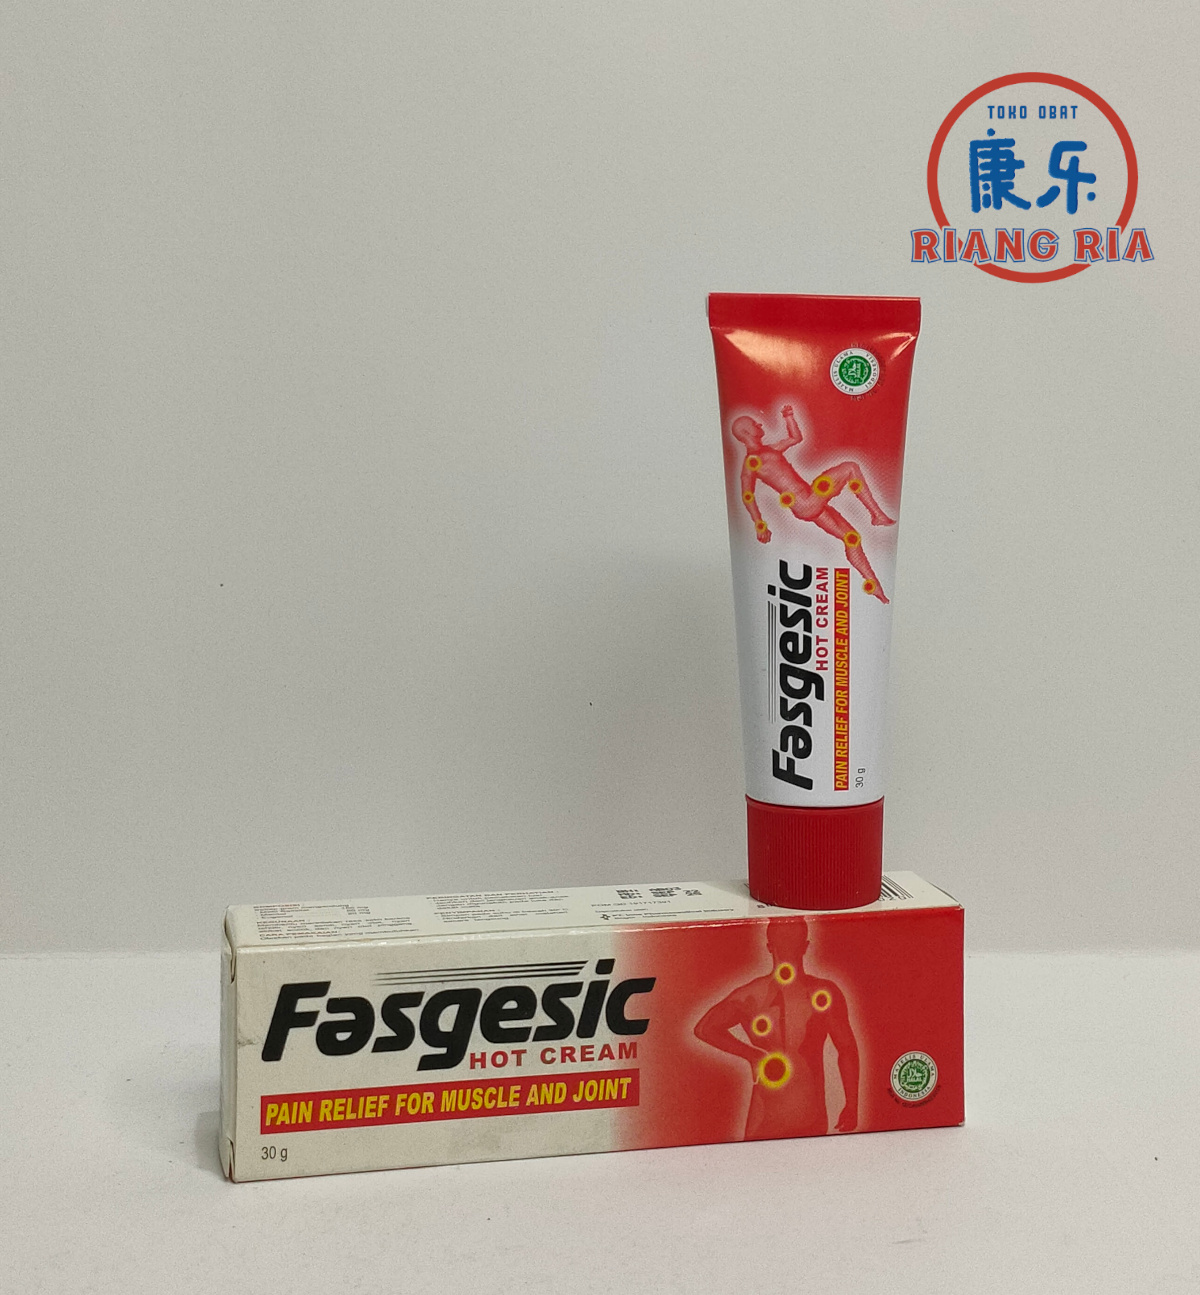 Fasgesic Hot Cream (30 gram) – Pain Relief For Muscle and Joint